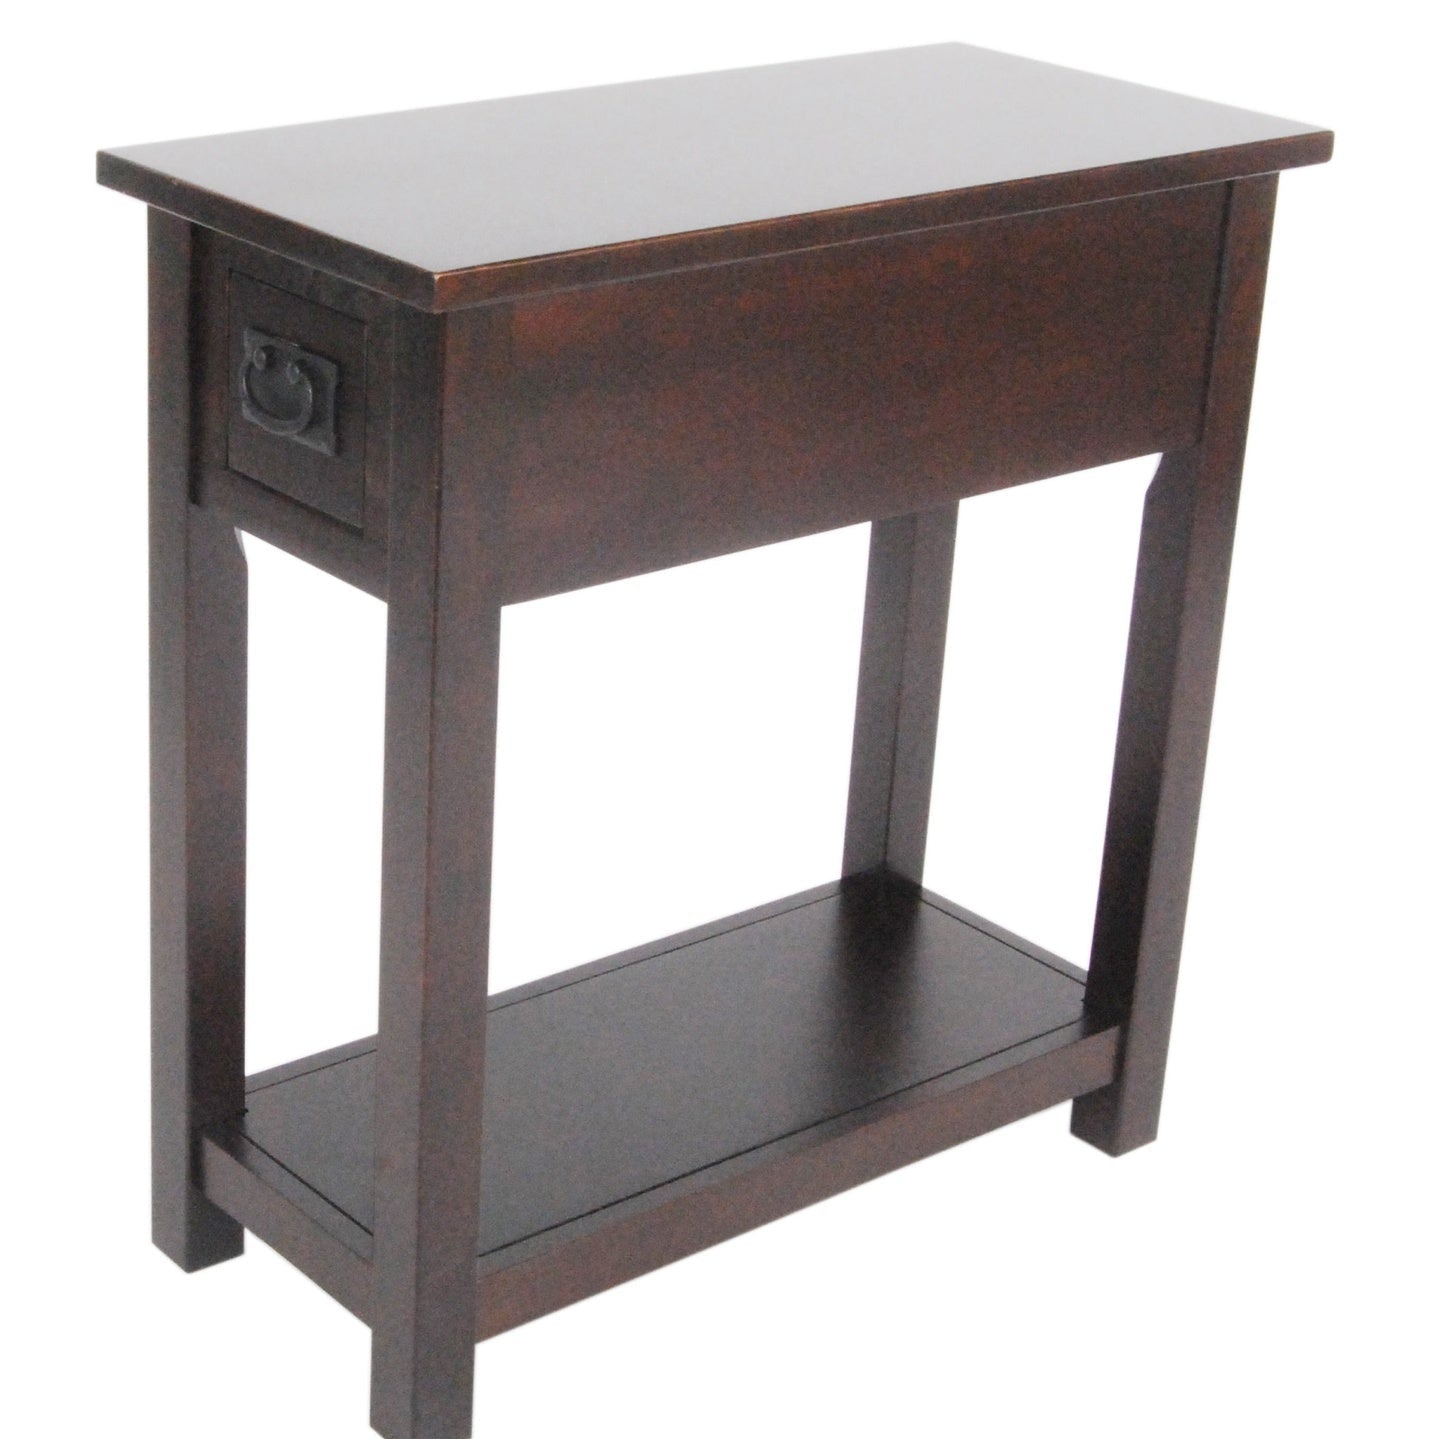 Mission Chairside Table, Espresso - End Tables